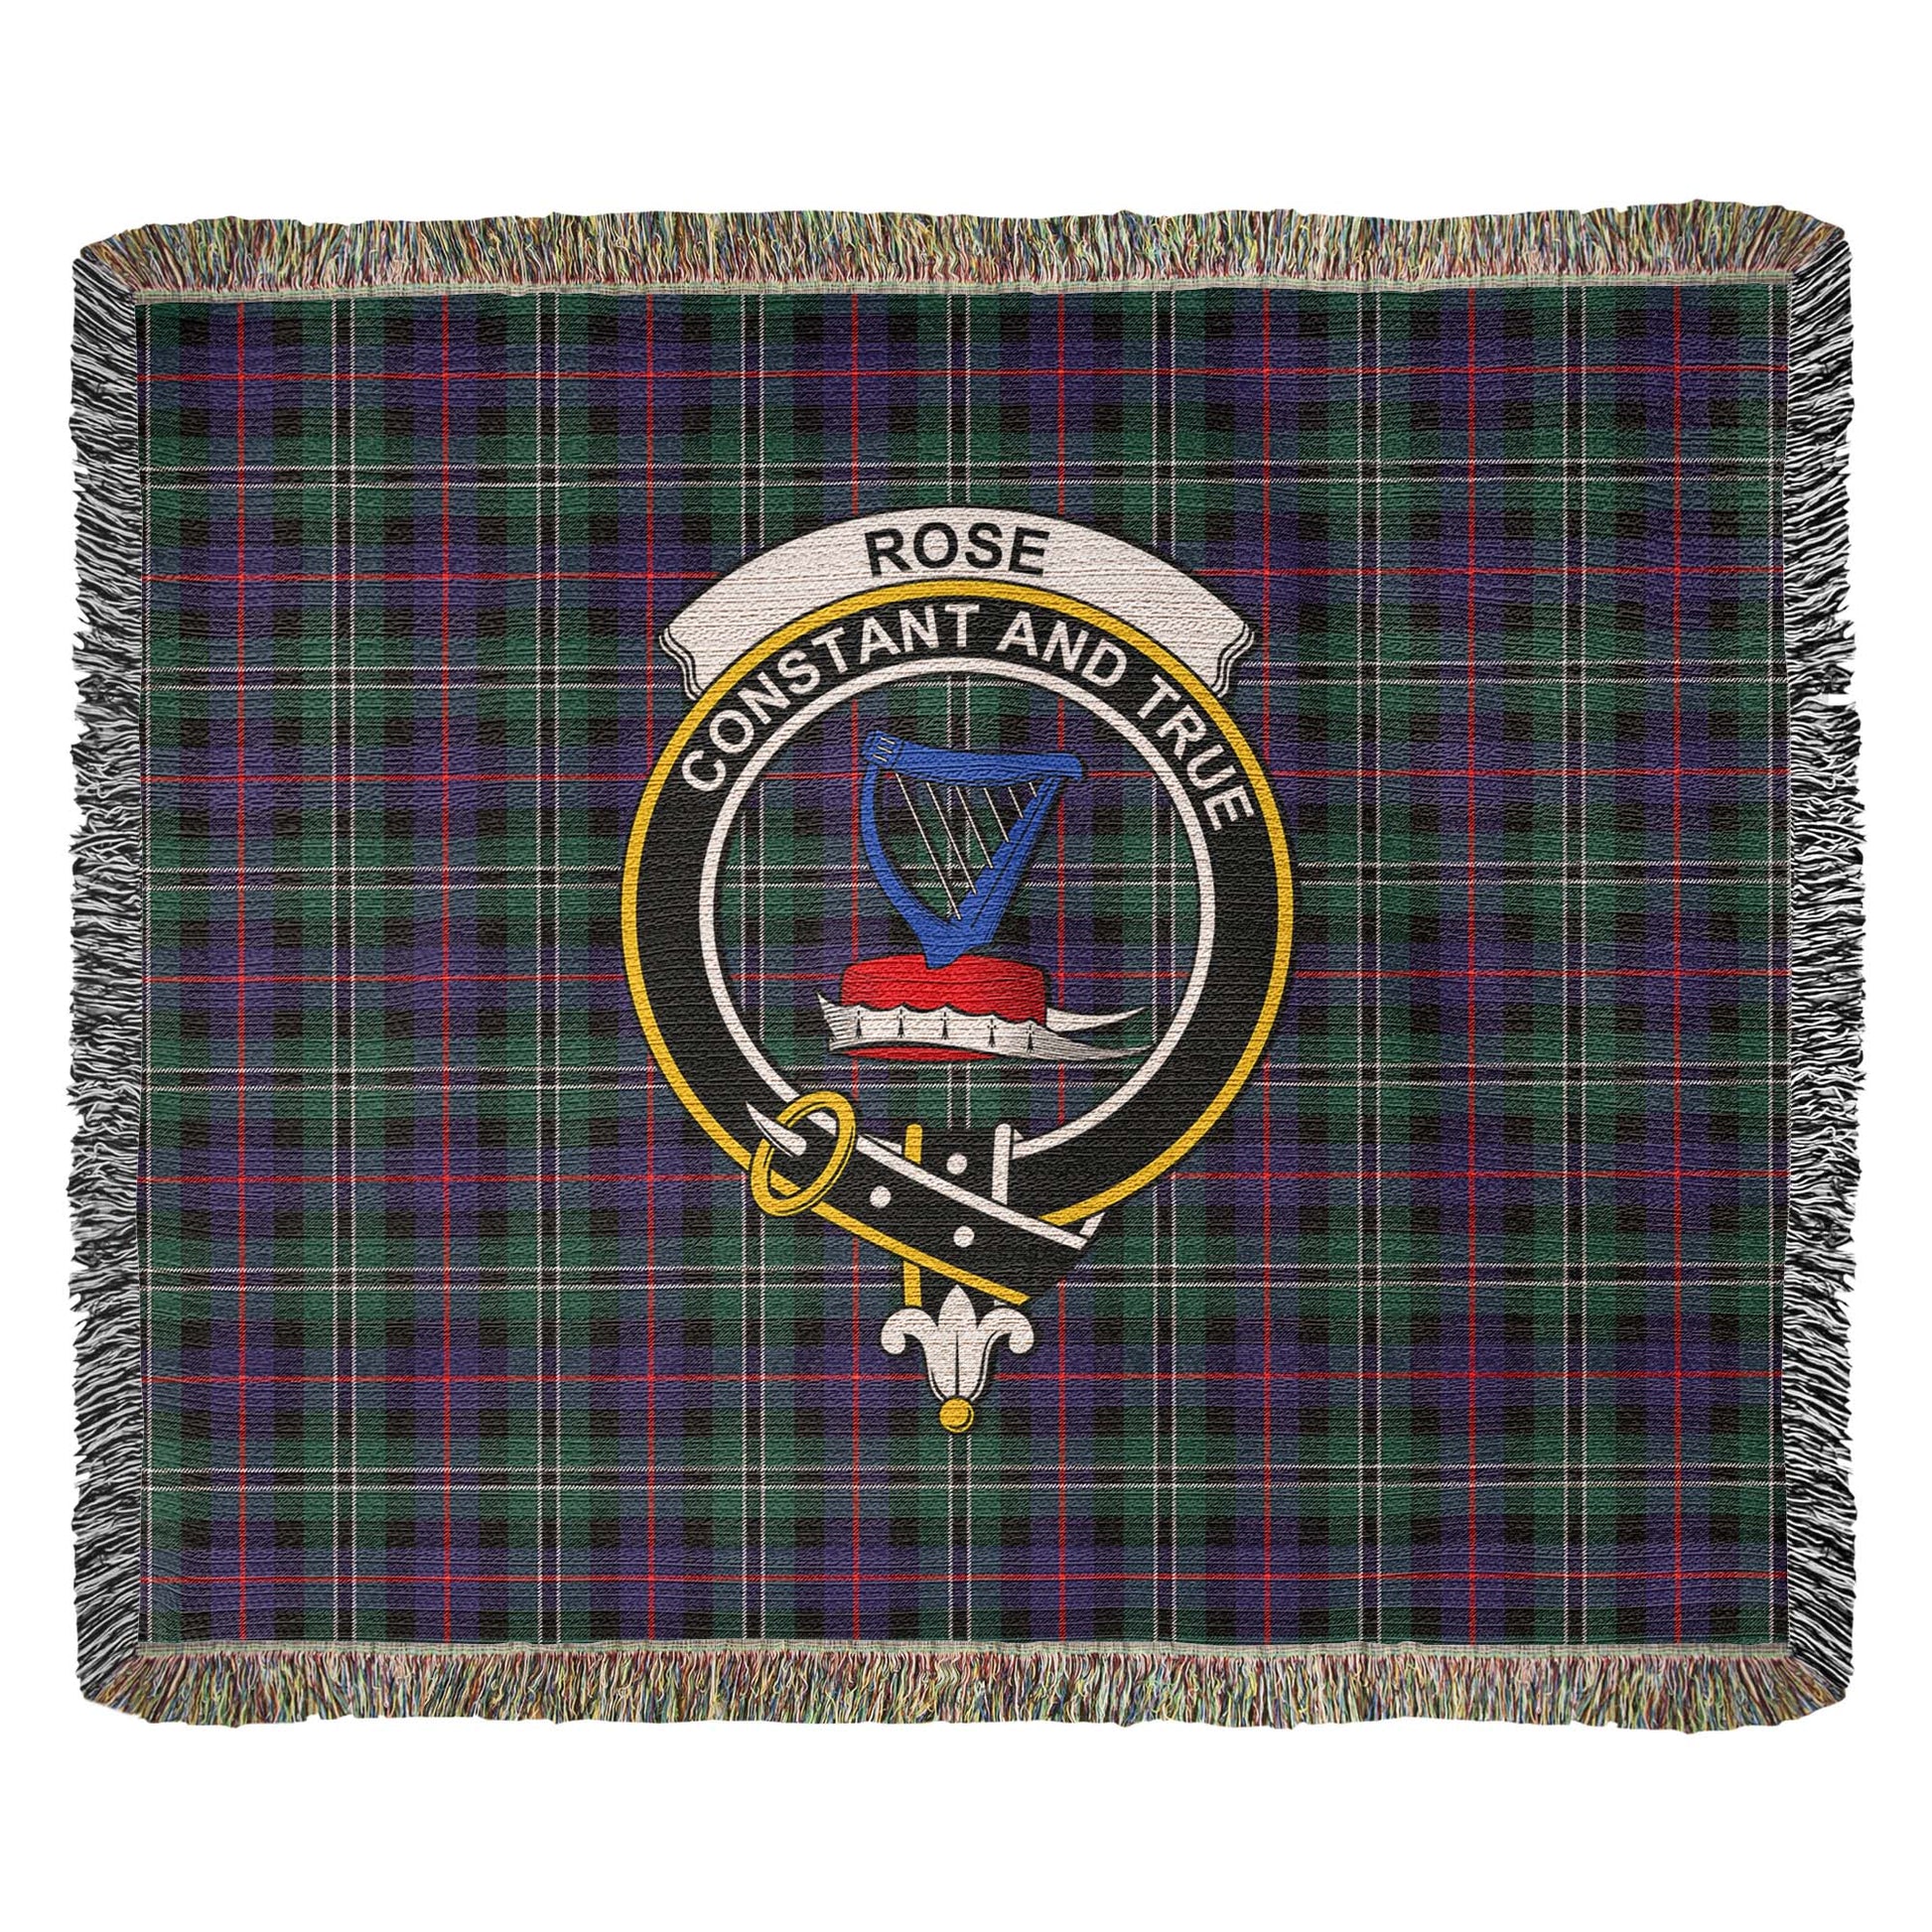 Tartan Vibes Clothing Rose Hunting Modern Tartan Woven Blanket with Family Crest